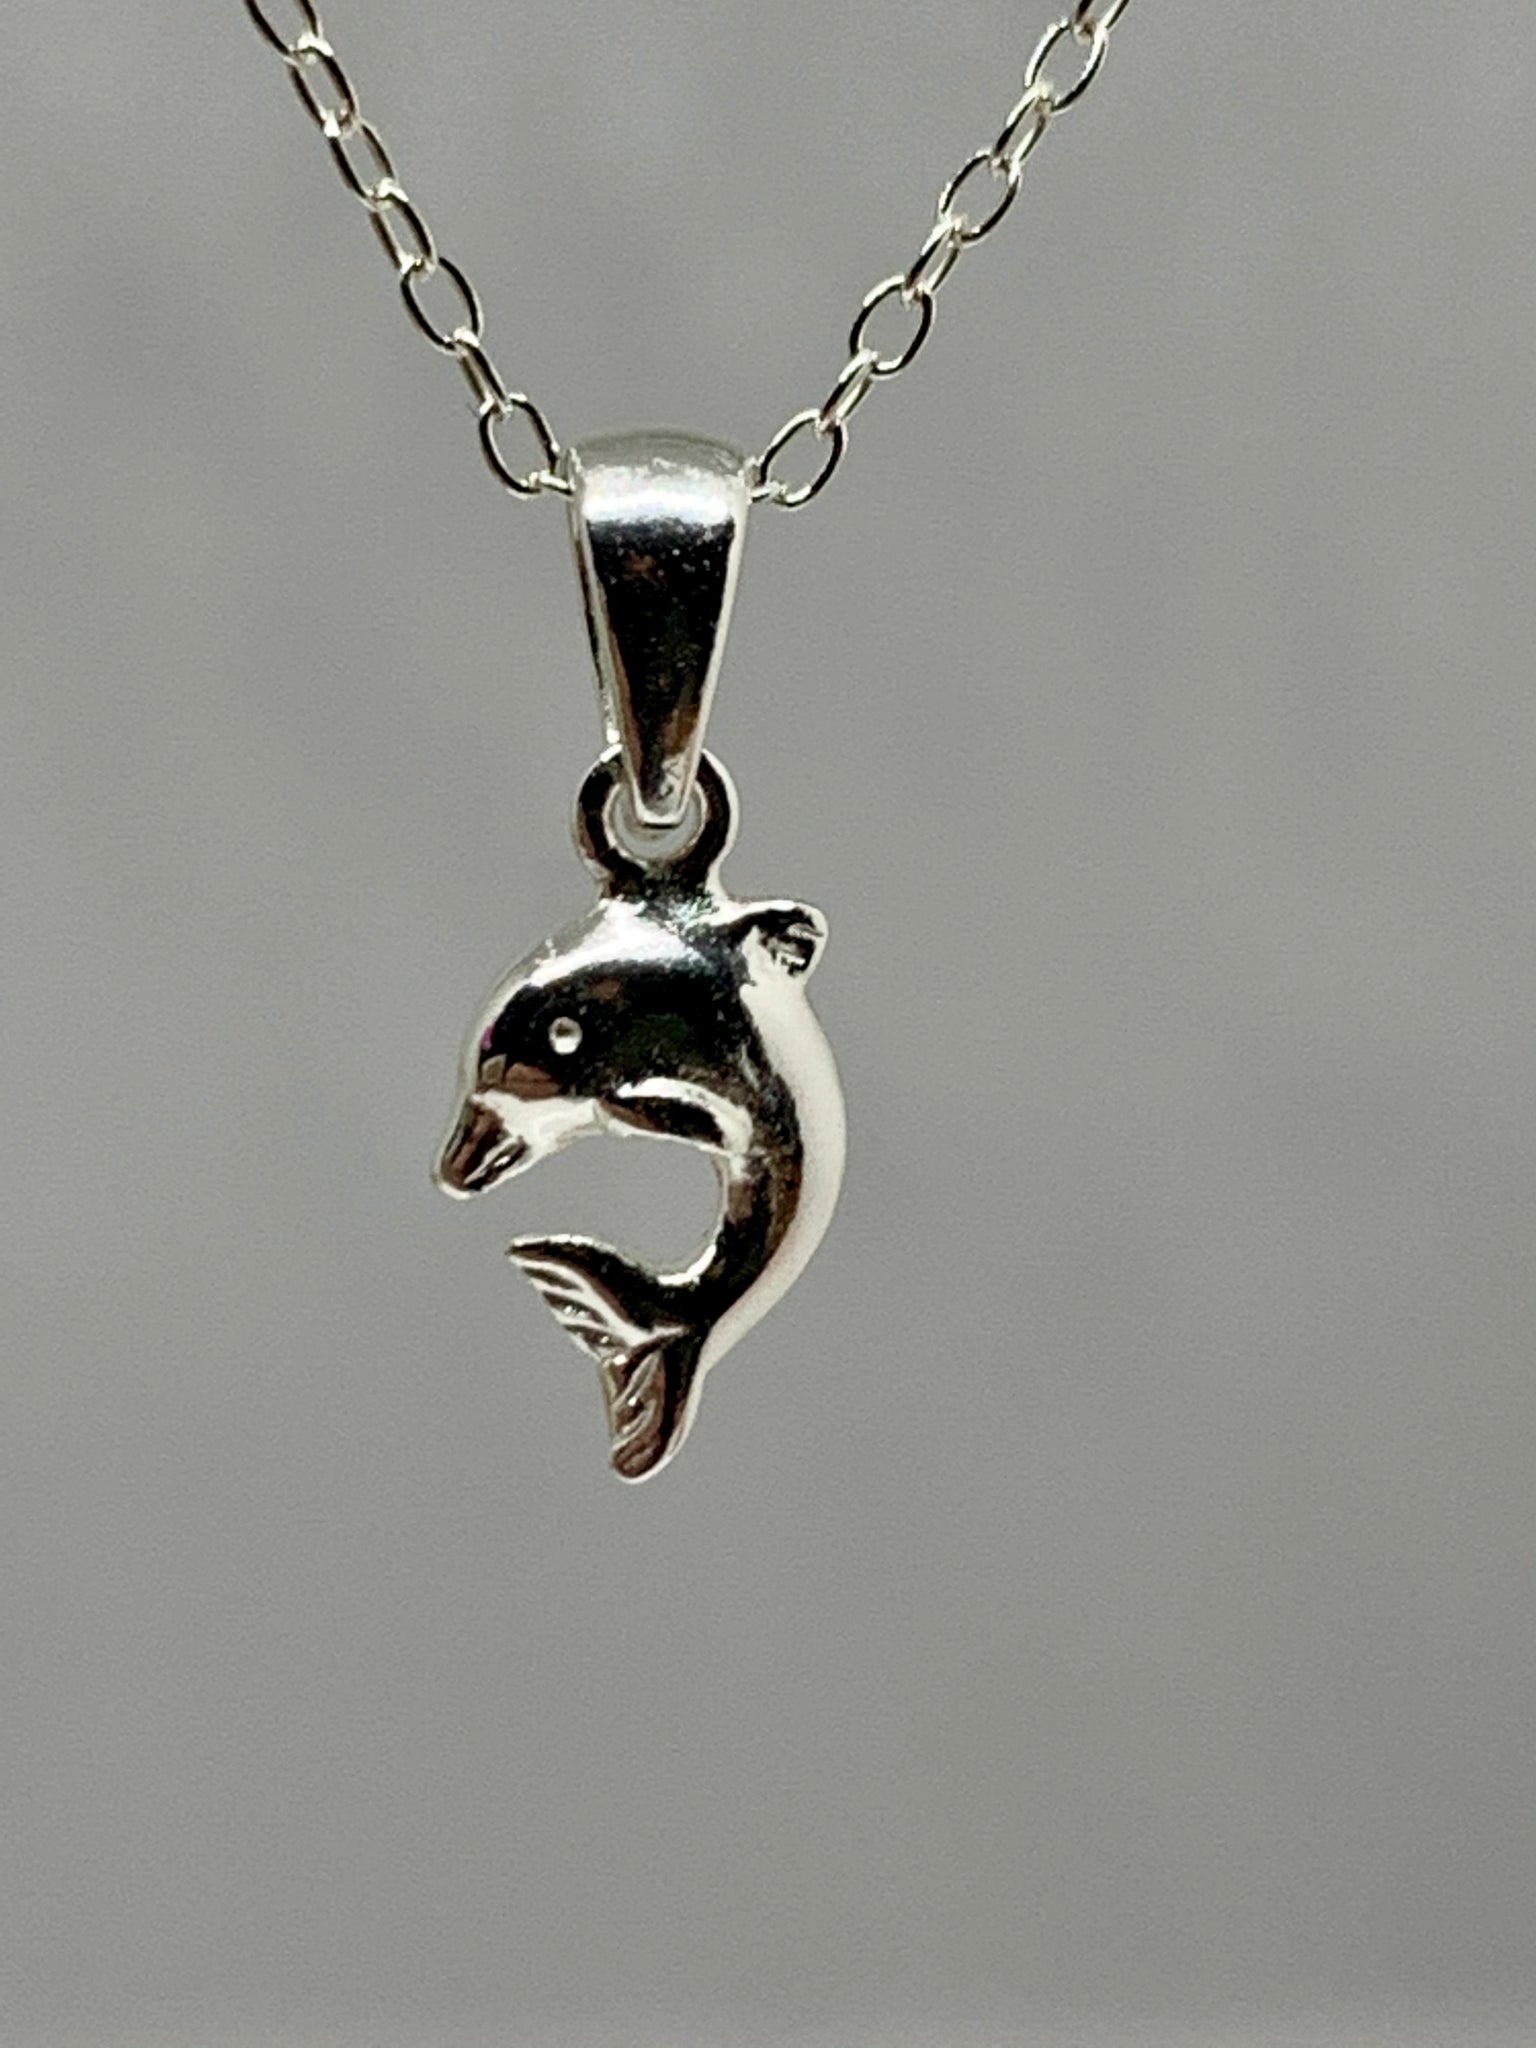 Dolphin necklace from Pixi Daisy